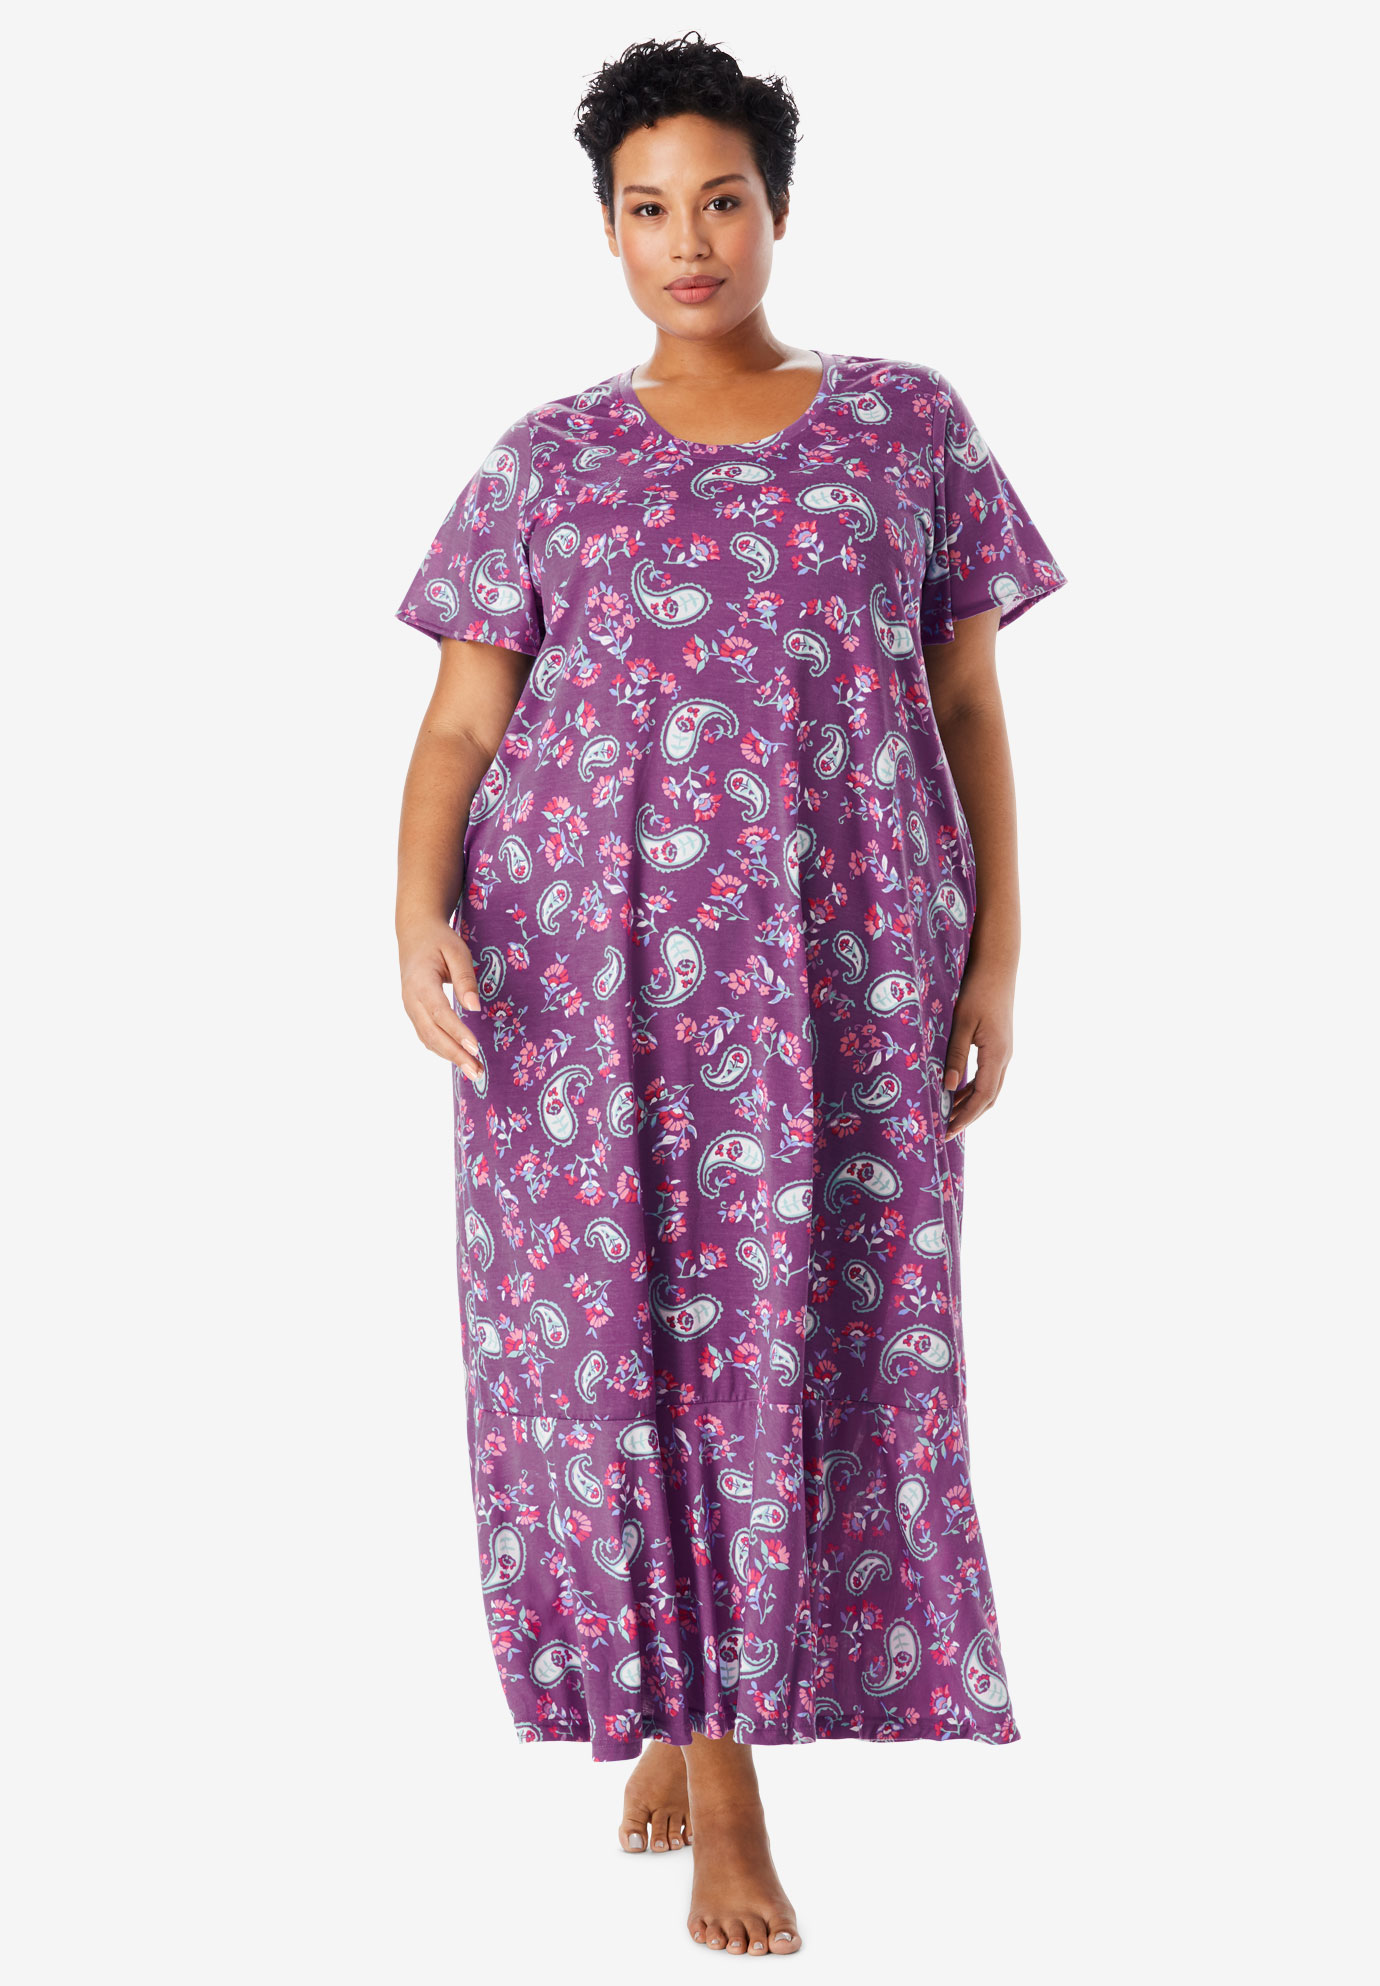 Cool Dreams Flounced Nightgown by Only Necessities®| Plus Size Sleep ...